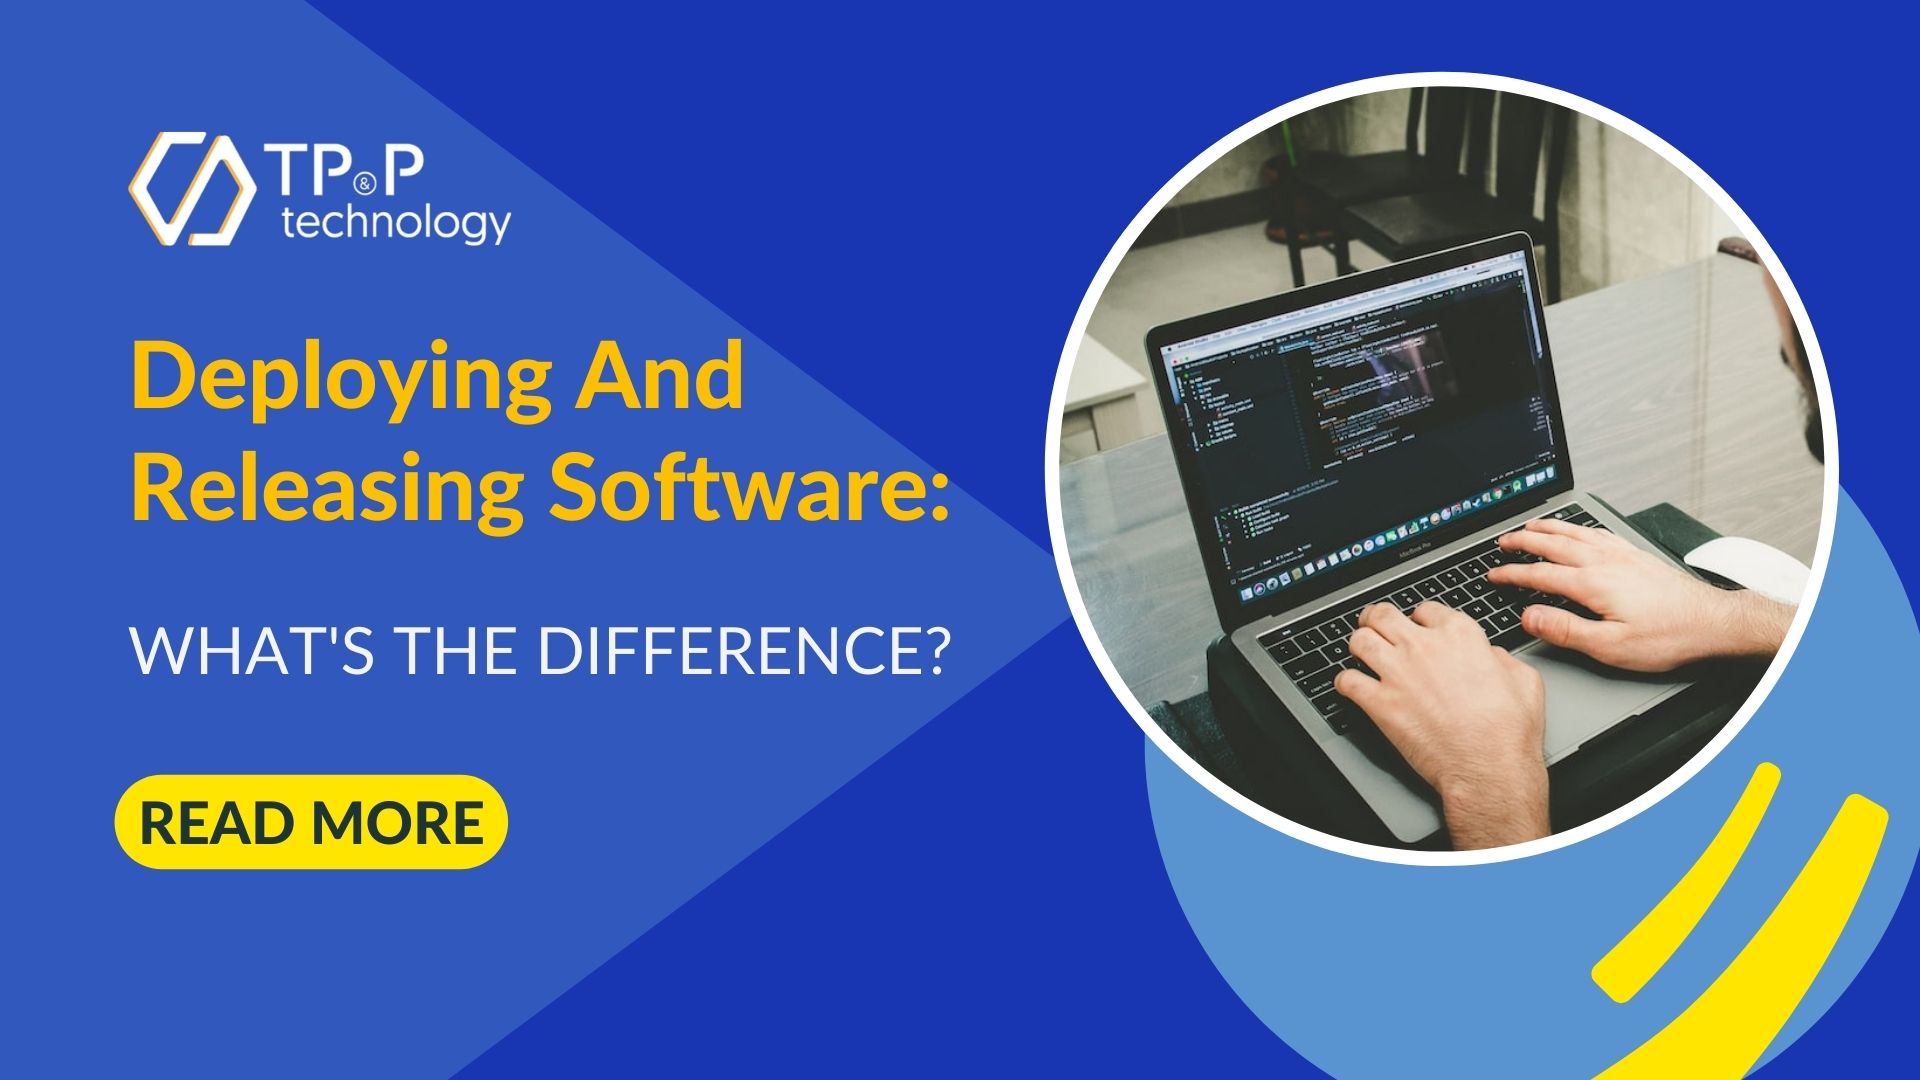 Deploying And Releasing Software: What's The Difference?